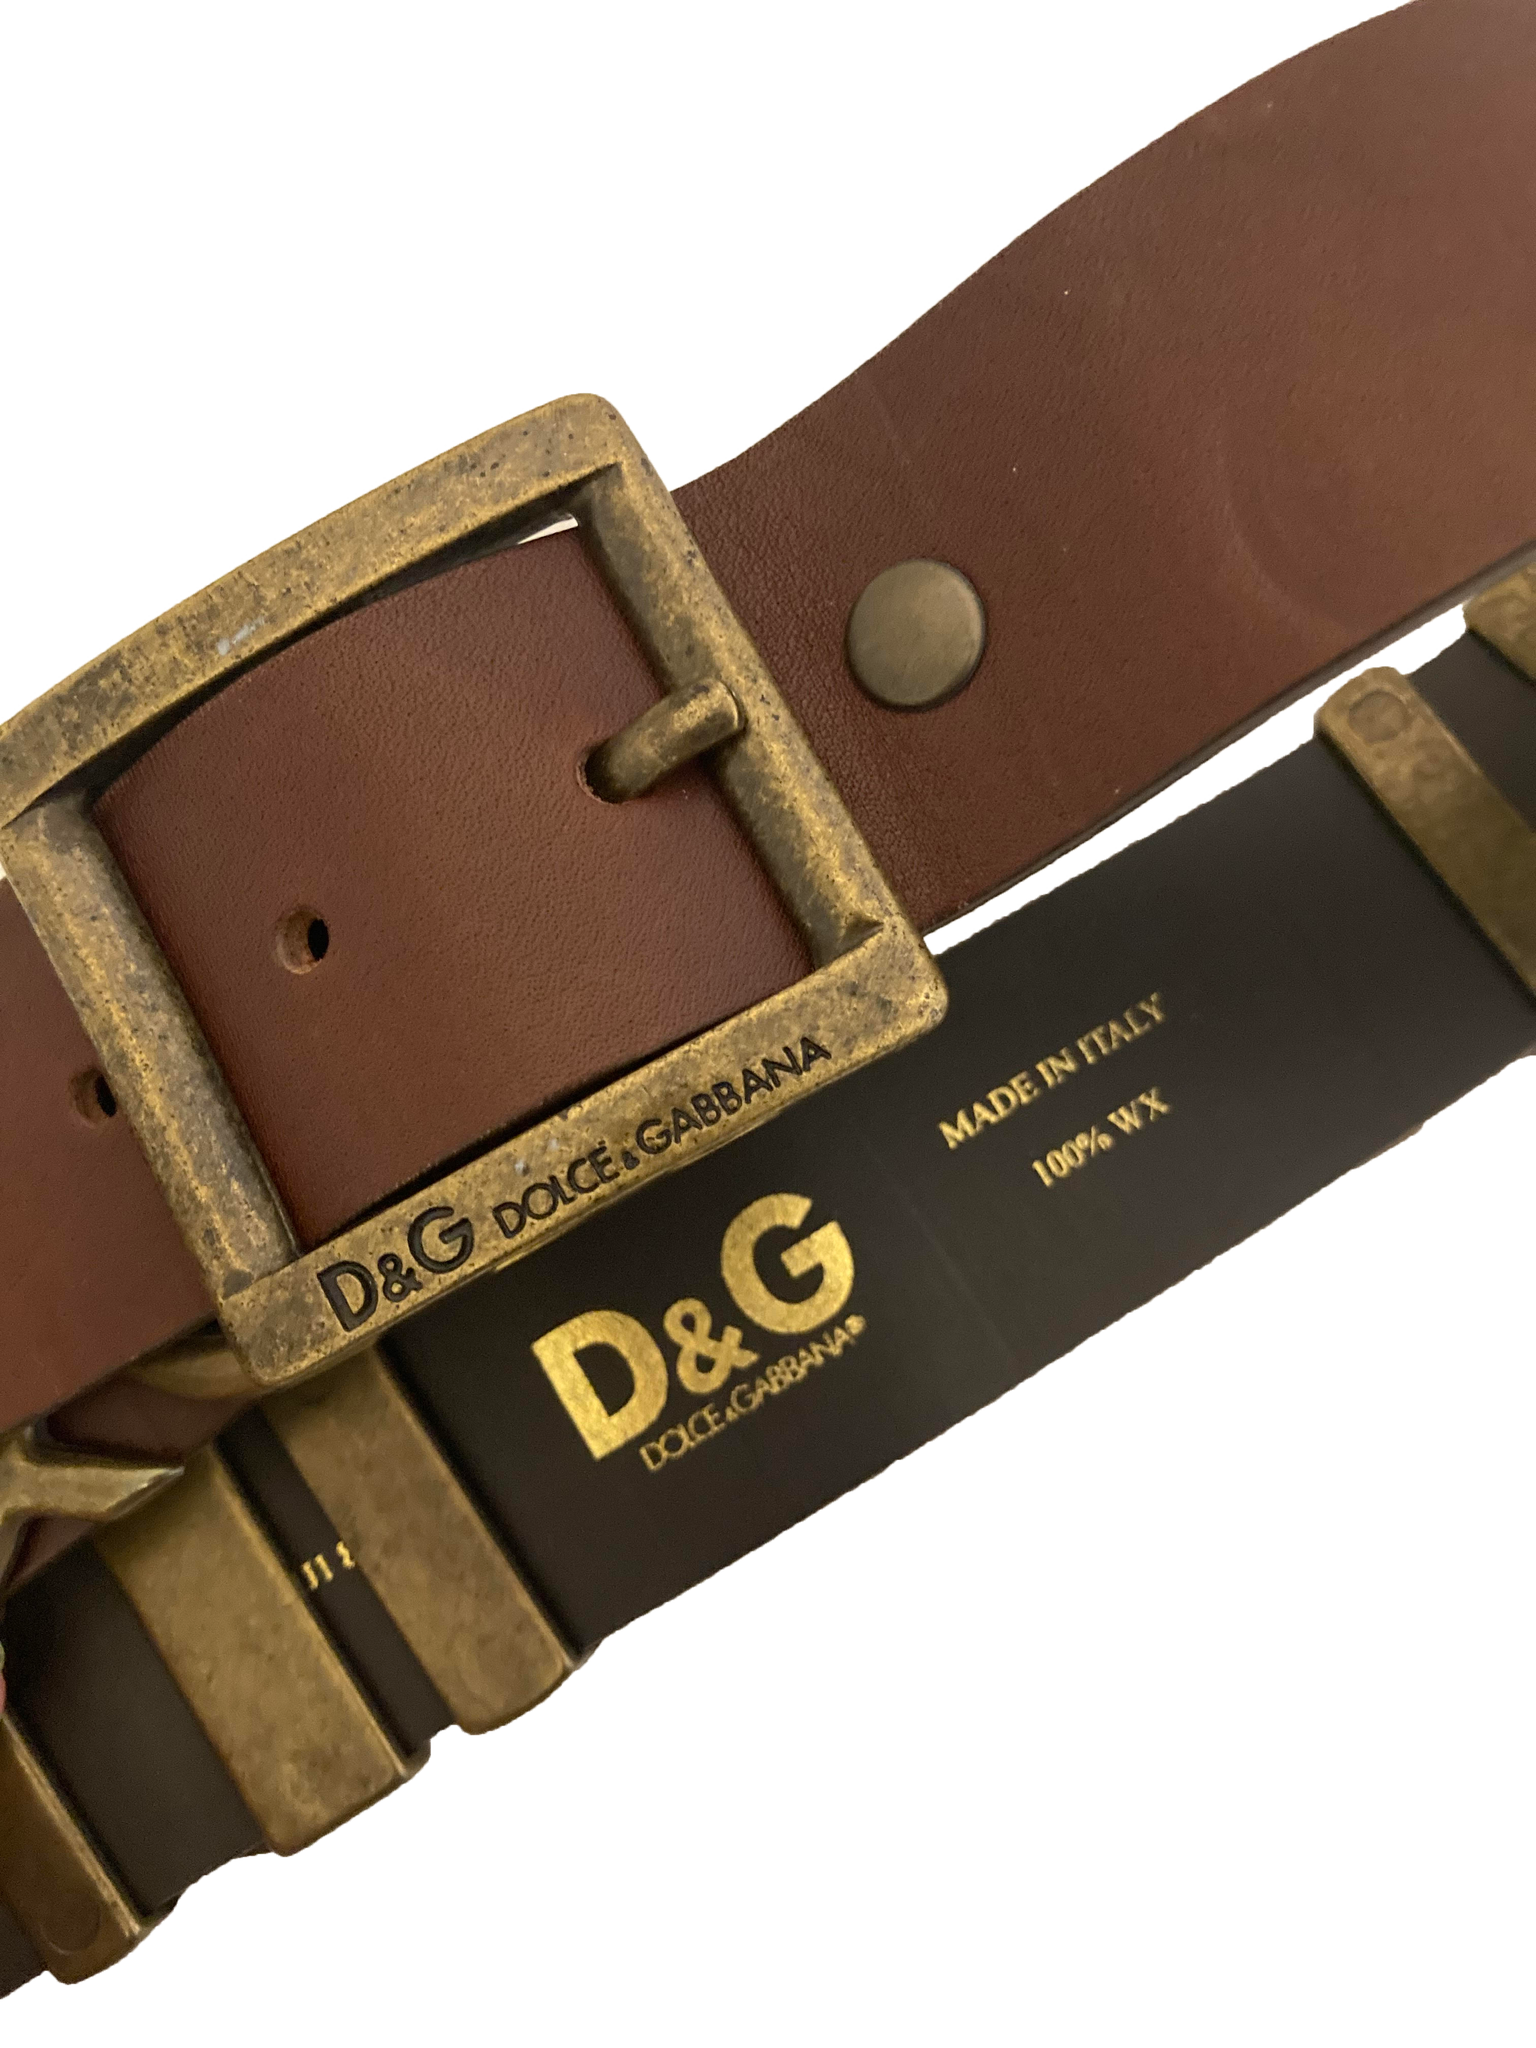 Leather and Metal Belt